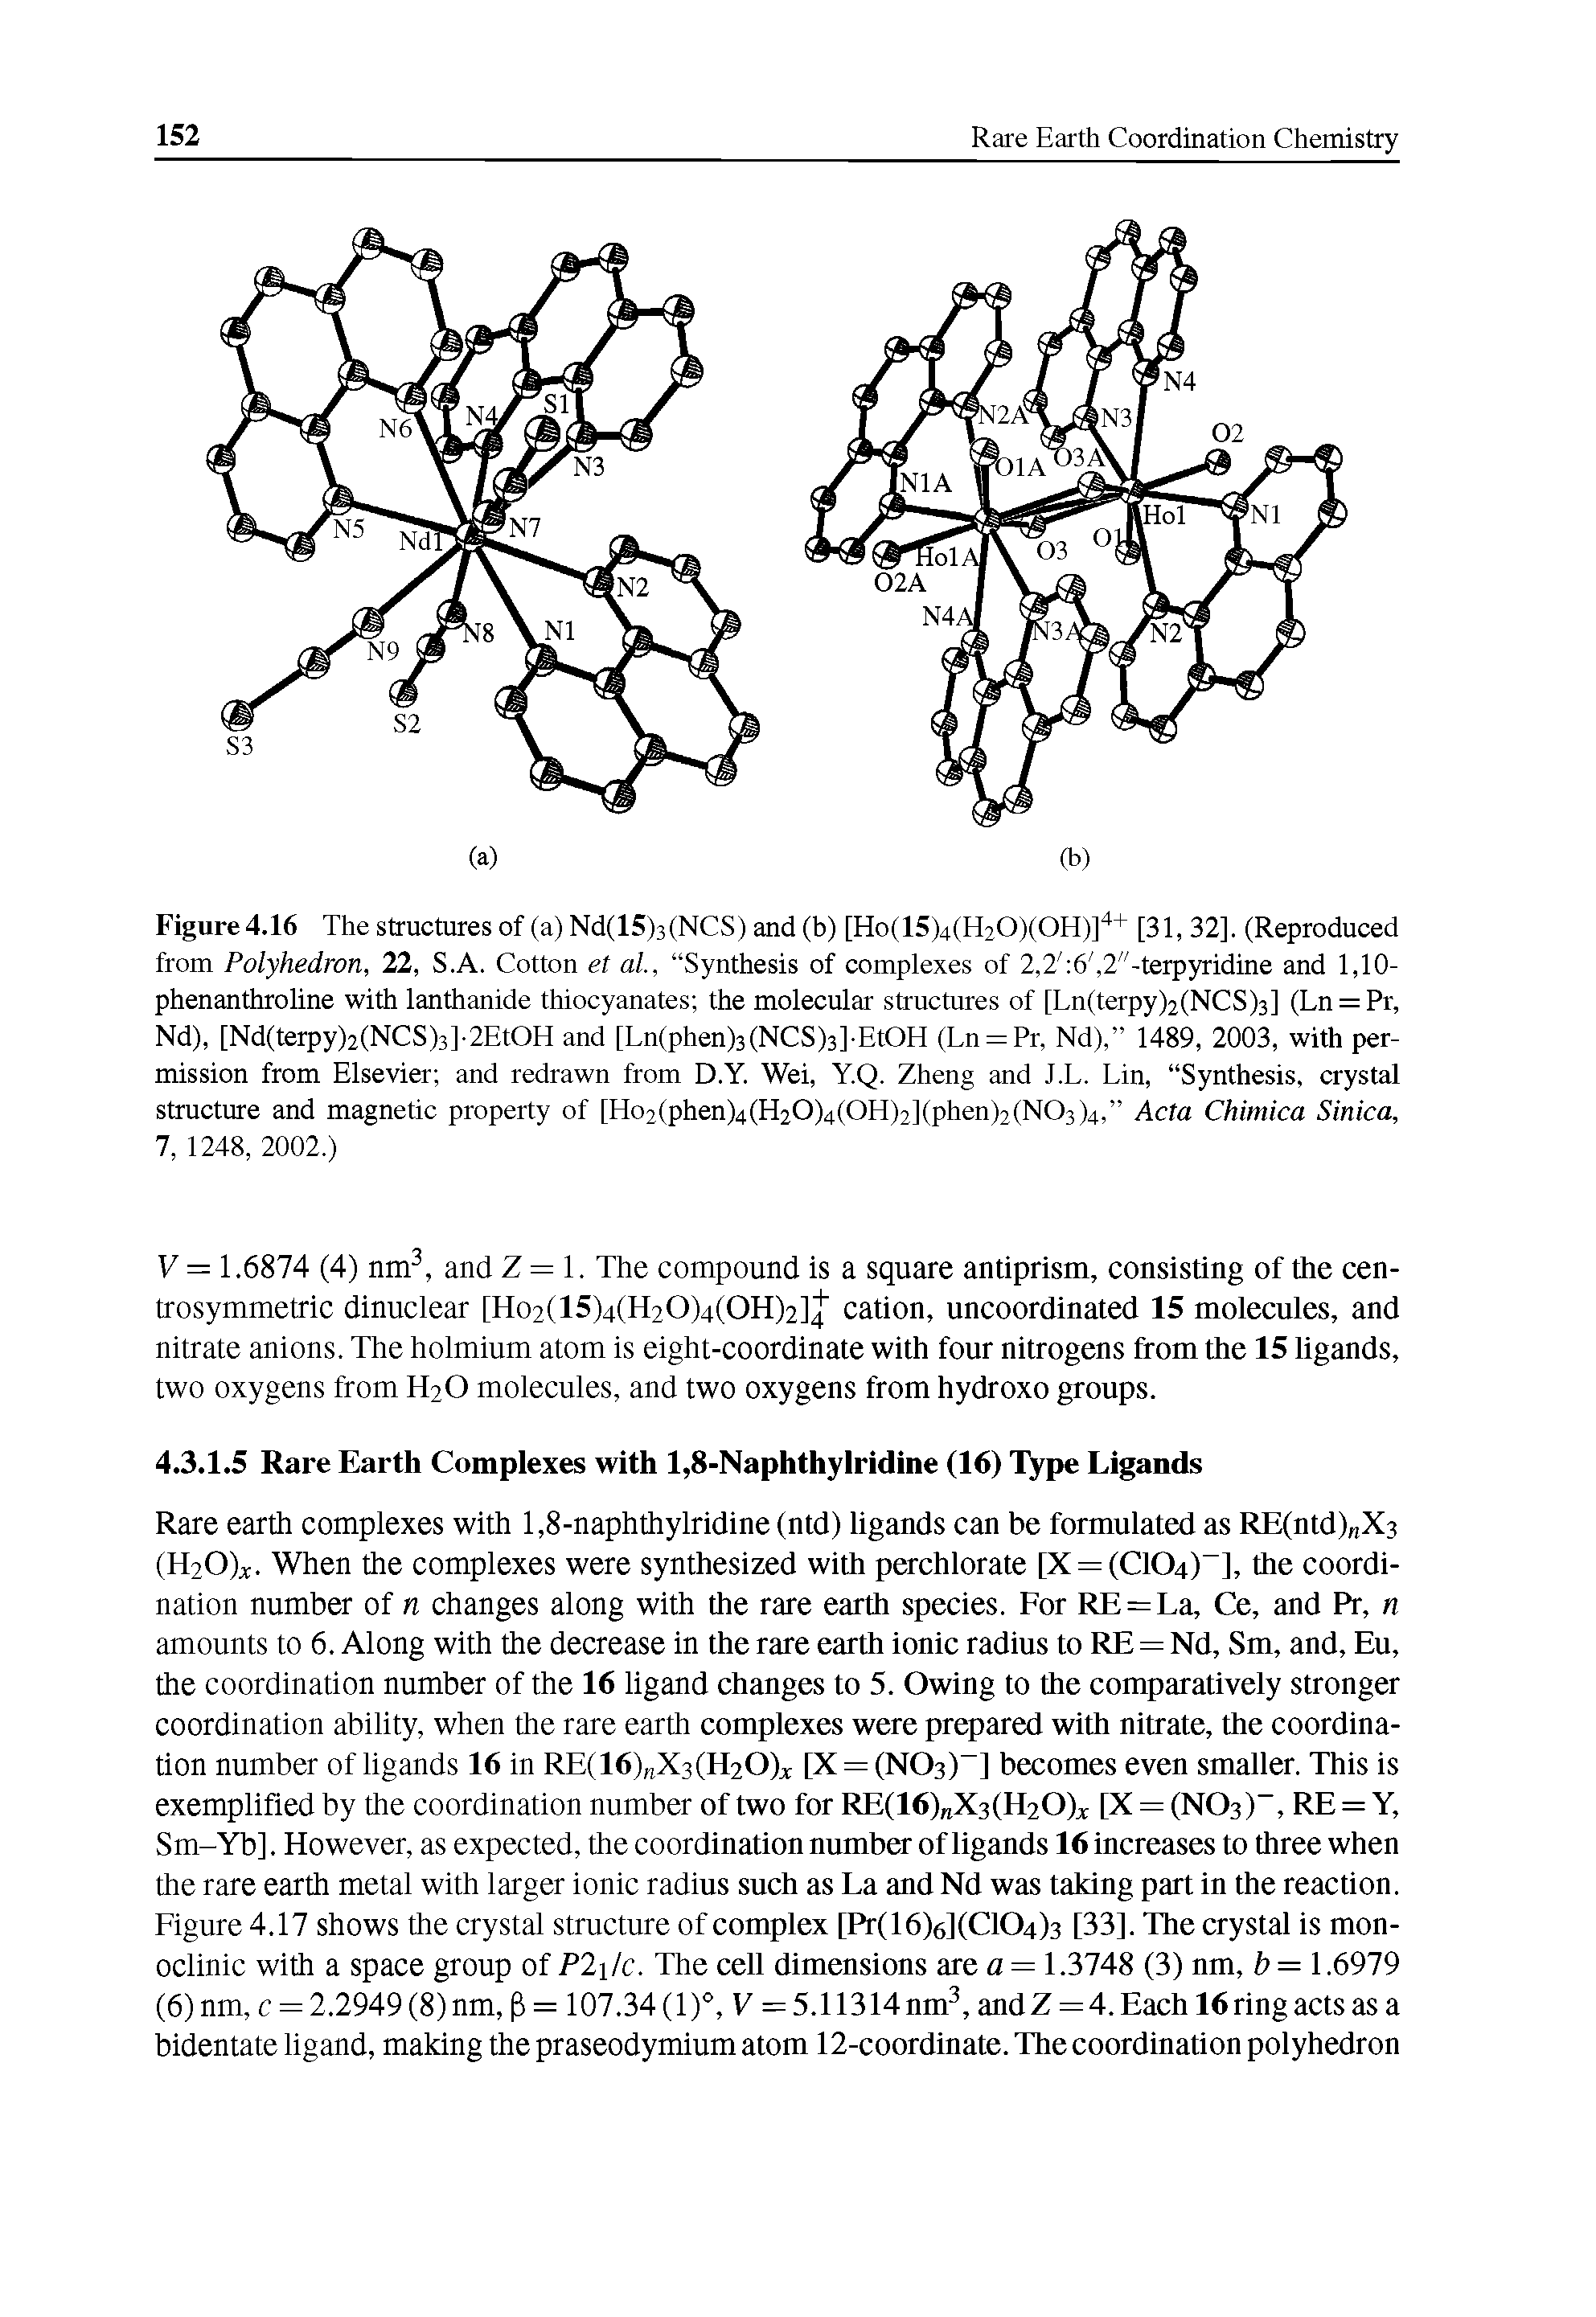 Figure 4.16 The structures of (a) Nd(15)3(NCS) and (b) [Ho(15)4(H20)(OH)]" + [31, 32], (Reproduced from Polyhedron, 22, S.A. Cotton et al, Synthesis of complexes of 2,2 6, 2"-terpyridine and 1,10-phenanthroline with lanthanide thiocyanates the molecular structures of [Ln(terpy)2(NCS)3] (Ln = Pr, Nd), [Nd(terpy)2(NCS)3]-2EtOH and [Ln(phen)3(NCS)3]-EtOH (Ln = Pr, Nd), 1489, 2003, with permission from Elsevier and redrawn from D.Y. Wei, Y.Q. Zheng and J.L. Lin, Synthesis, crystal structure and magnetic property of [Ho2(phen)4(H20)4(OH)2](phen)2(N03)4, Acta Chimica Sinica, 7, 1248, 2002.)...